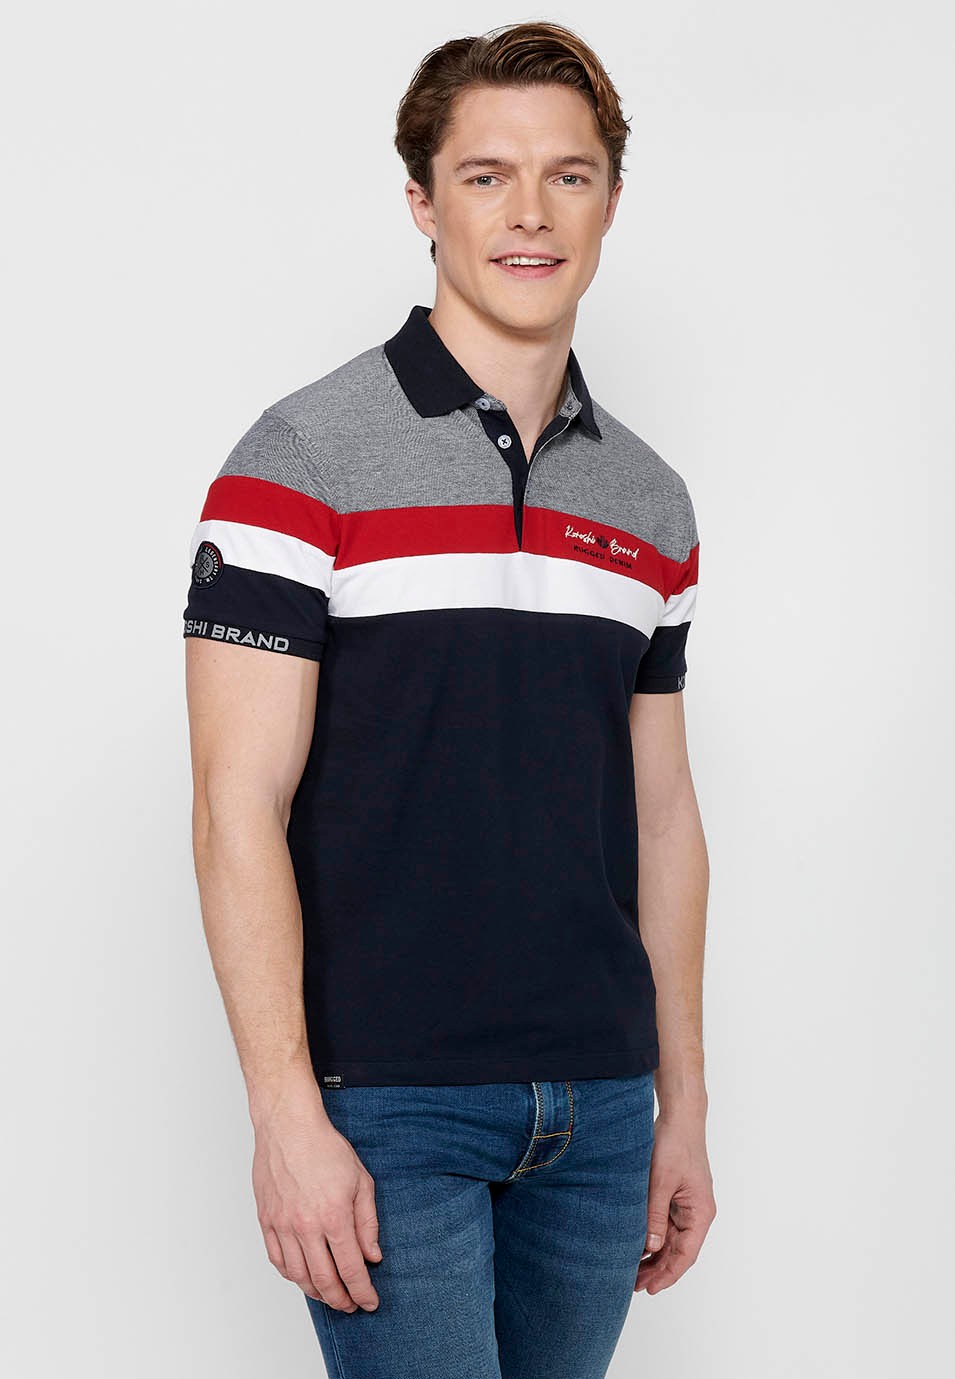 100% cotton short sleeve polo shirt, striped detail on the chest, navy color for men